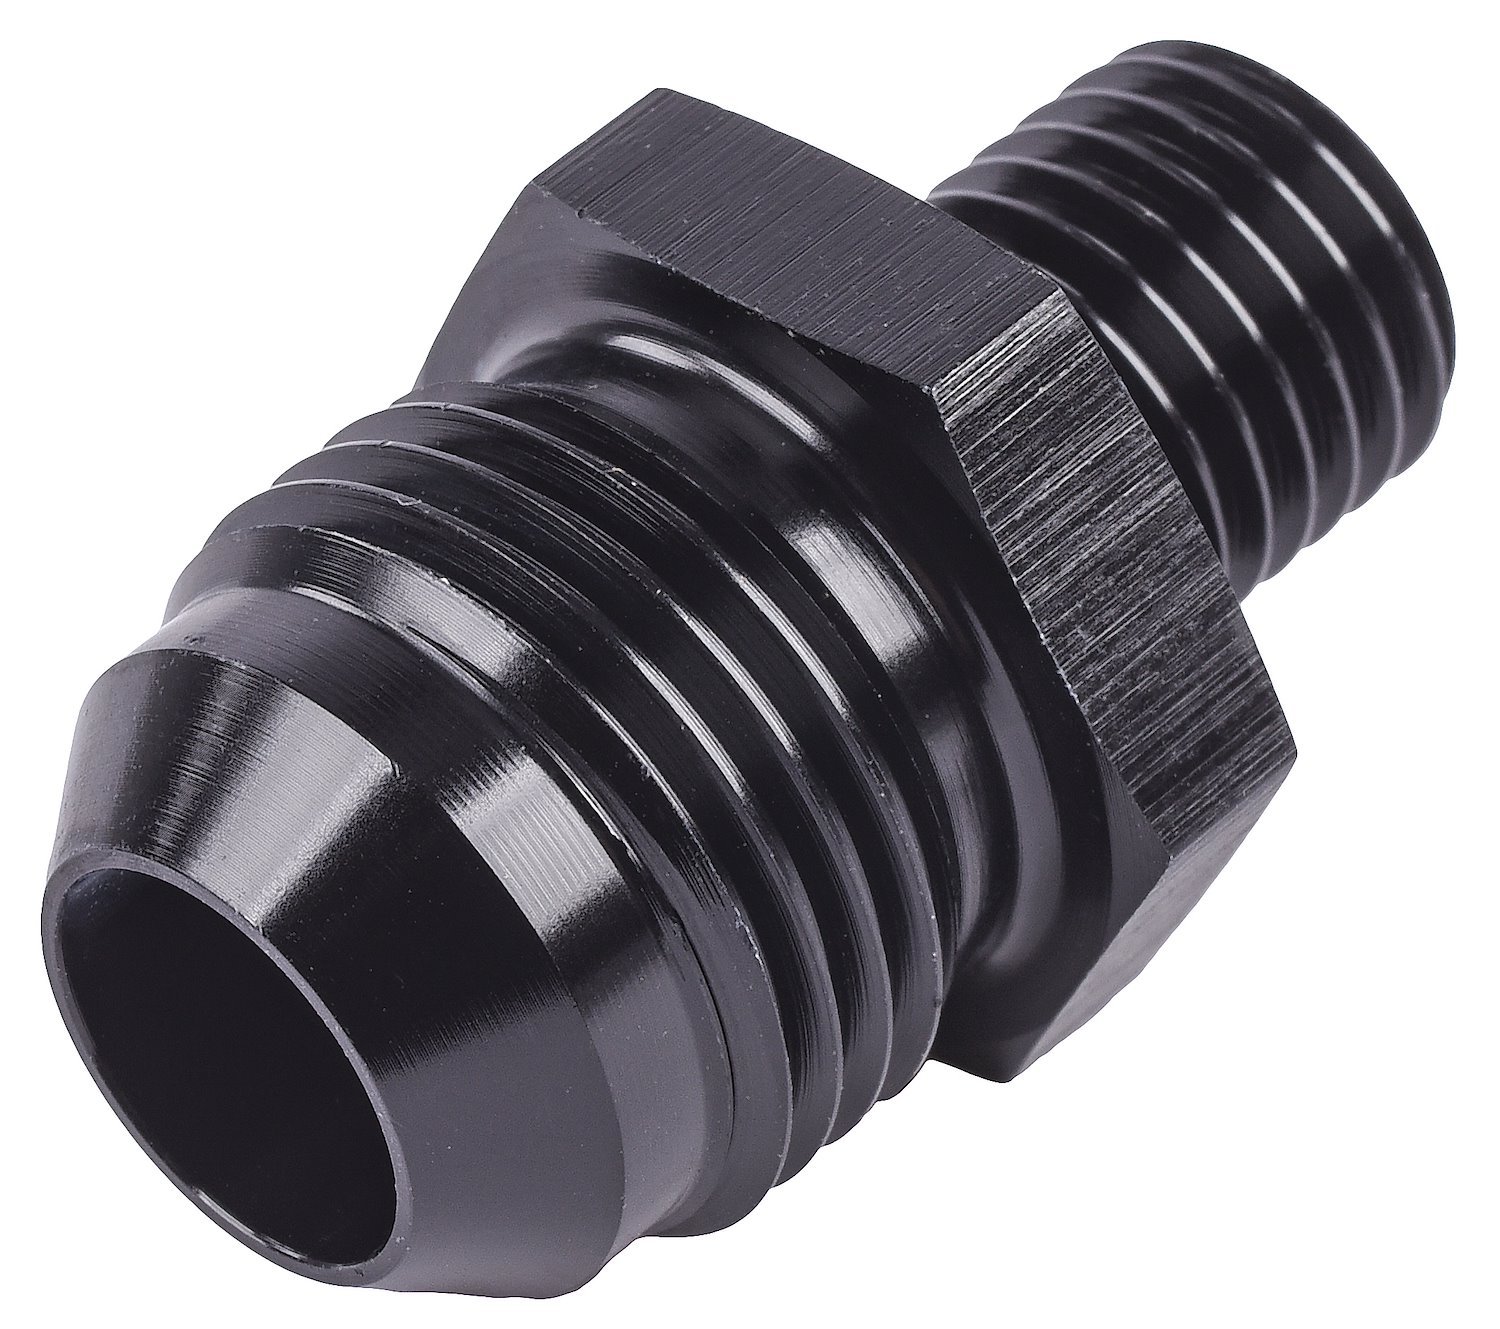 AN to Metric Adapter Fitting [-8 AN Male to 12mm x 1.5 Male]